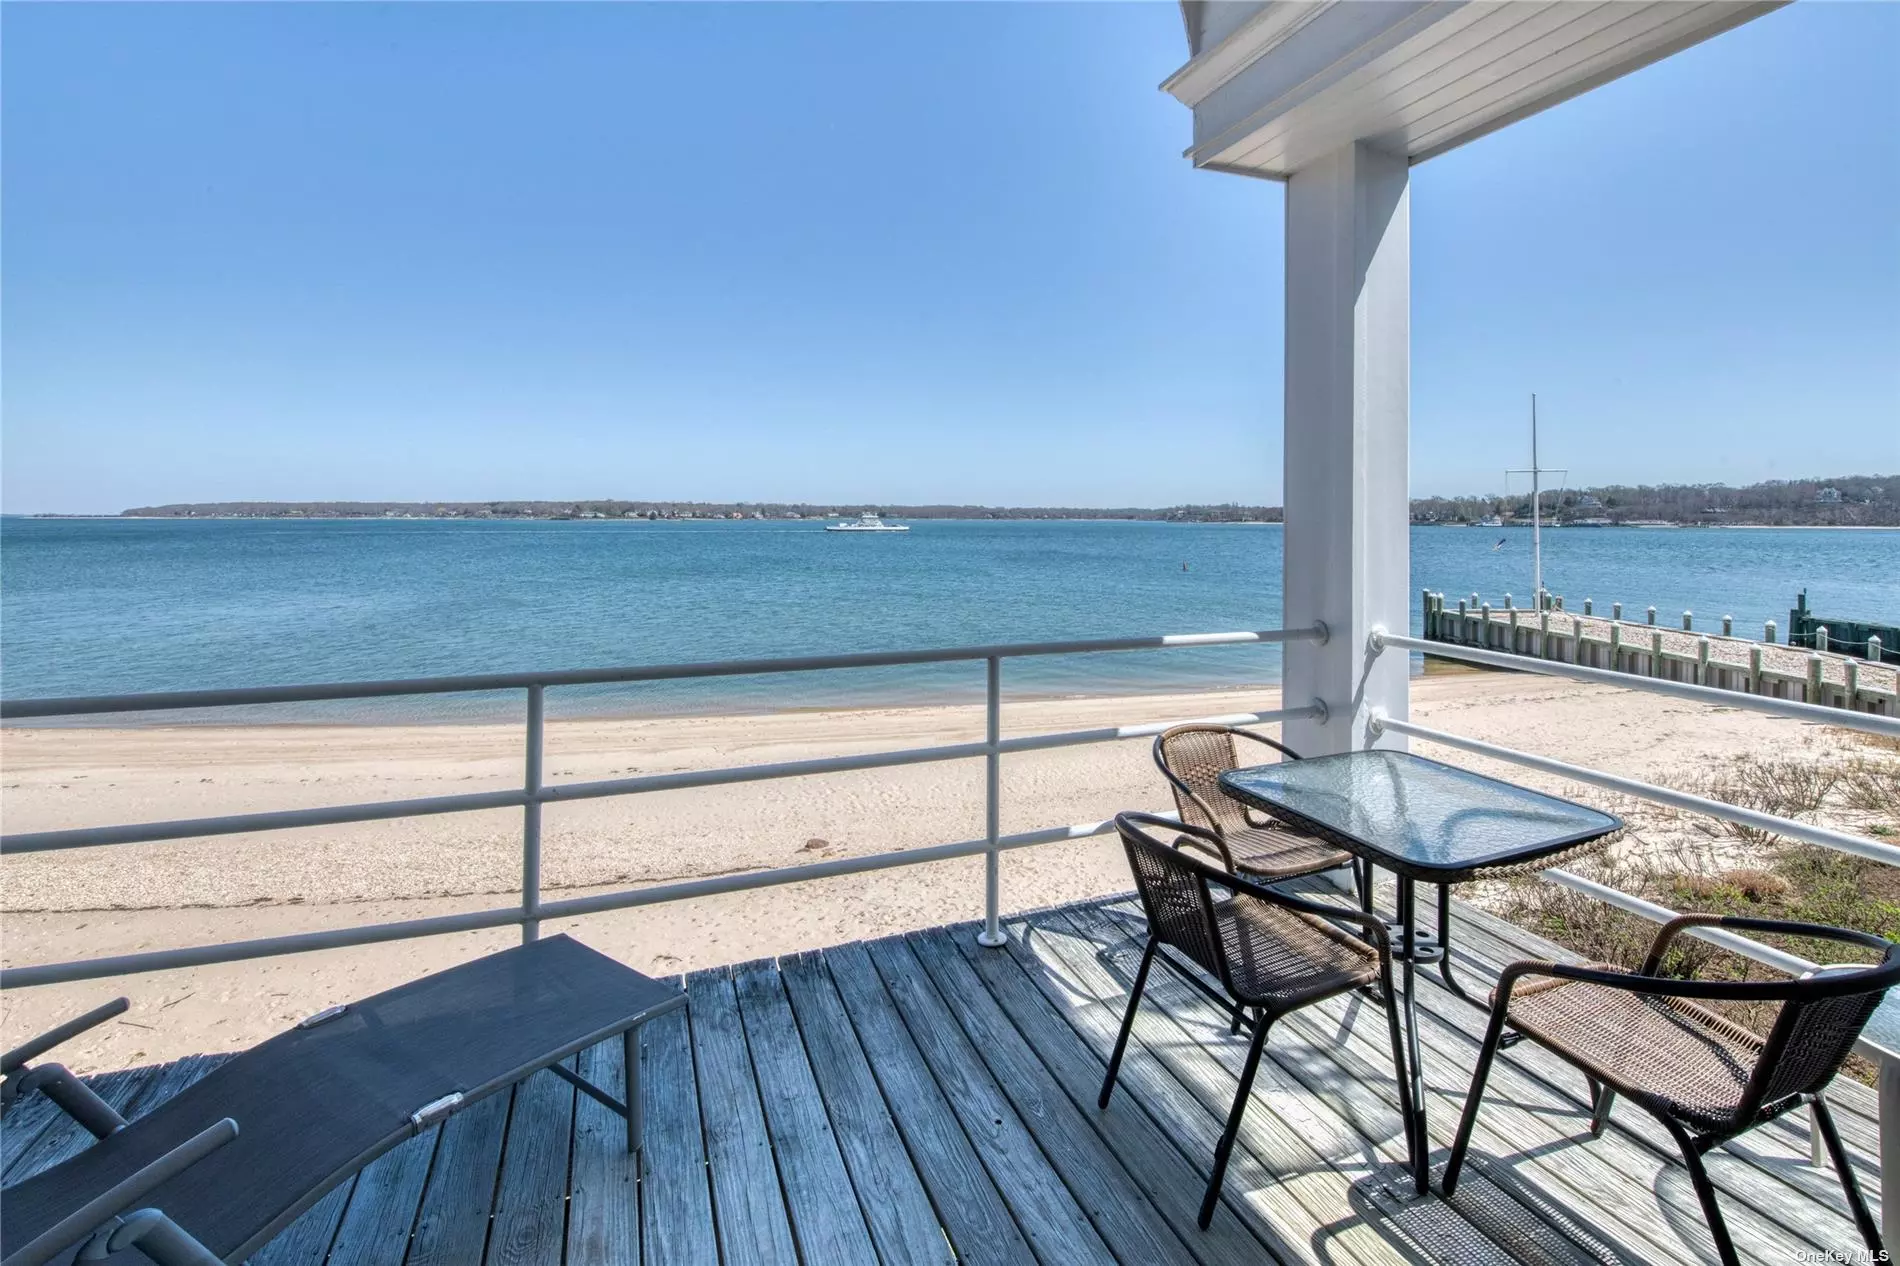 Newly Renovated Unit W/Spectacular Views Of Bay, Beach & SI Beyond. 2 Bed/ 2 Bath. Styled Elegantly. Open Plan W/ Views From Every Window. Waterfront Balcony On Beach. Complex has a Waterfront Pool, Tennis & Pickle Ball Court & Over 200 Ft of Bay Beach. Rental Includes a Boat Slip in Marina. In Heart Of Village. Close To Restaurants, Transportation, Ferry & Shops. (Southold Town Rental Permit #21-063) June $13500; July $18500; Aug-LD $23000.